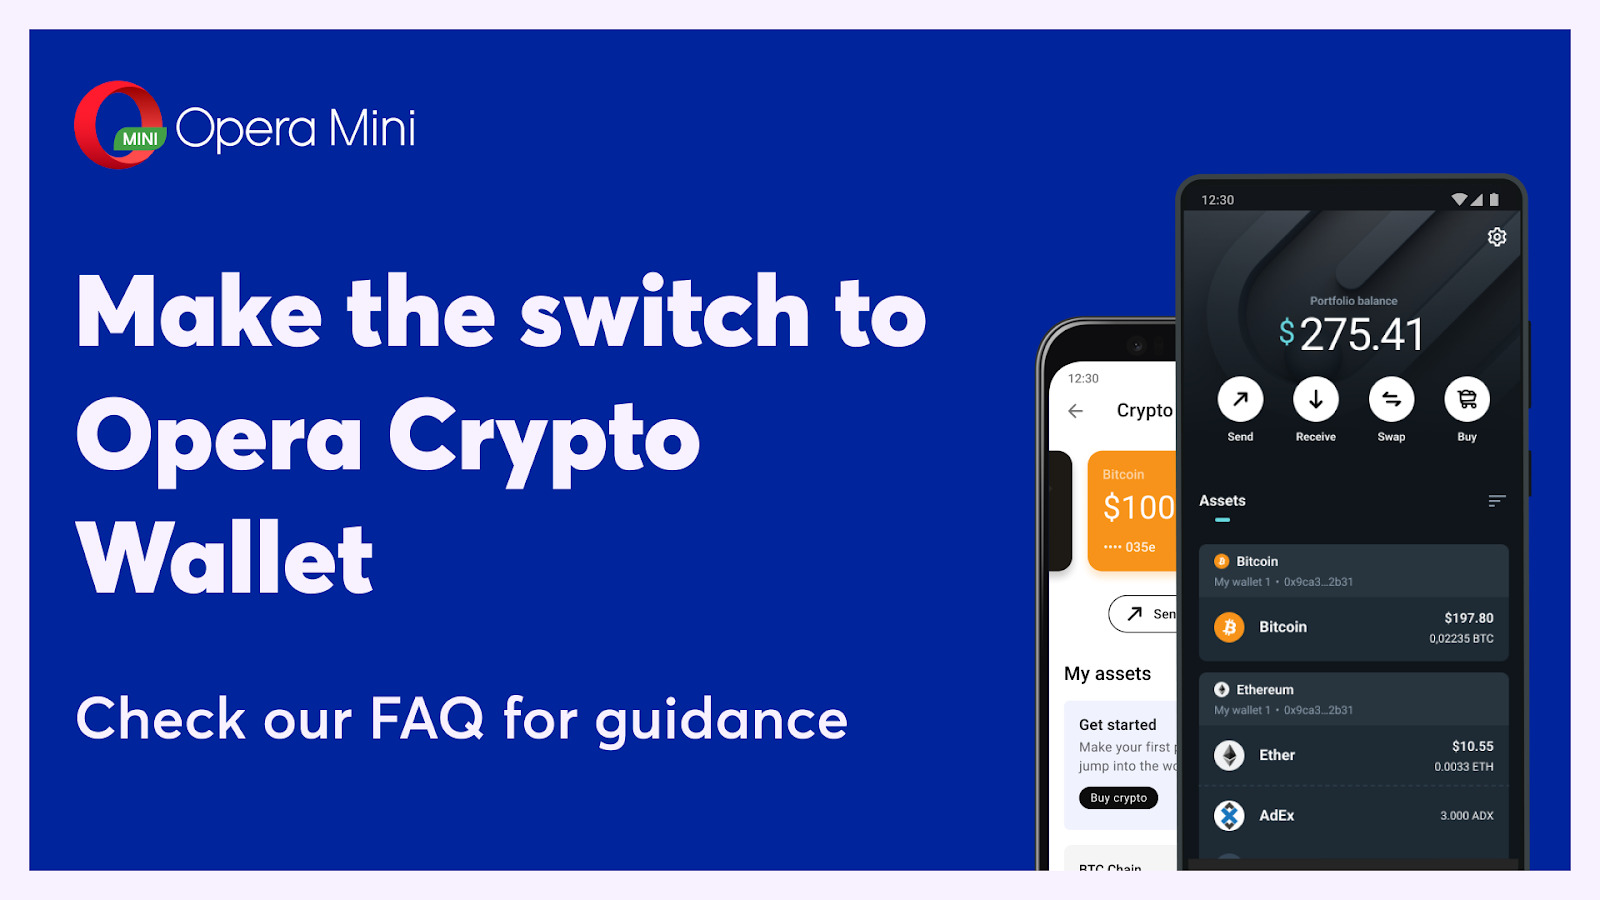 Make the switch to the Opera Crypto Wallet.